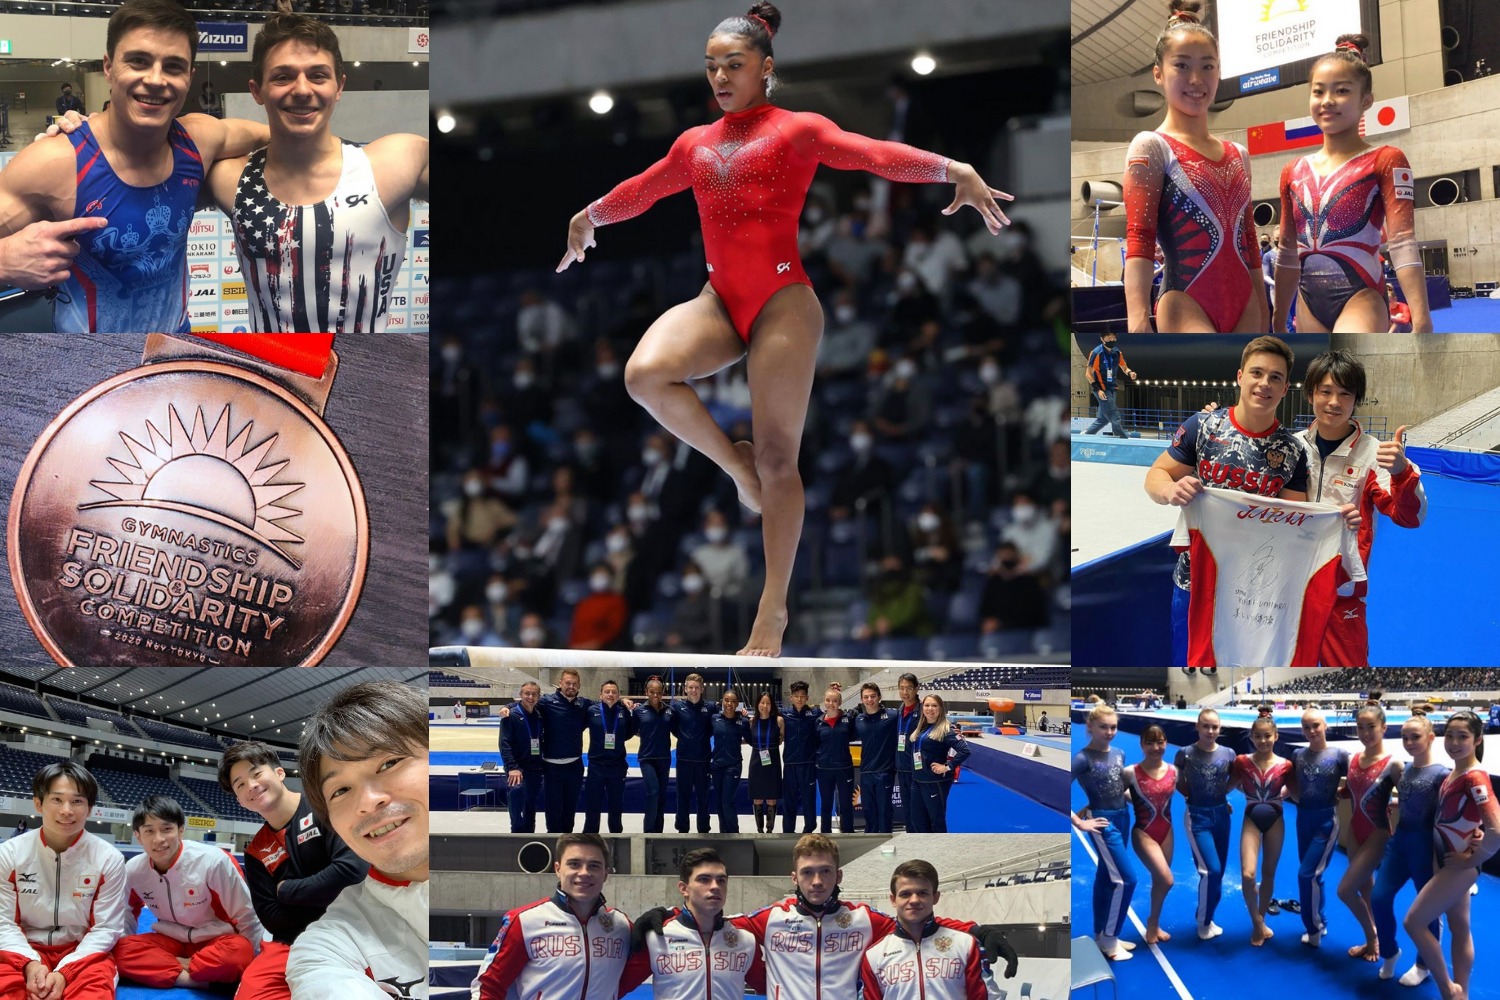 FIG Friendship and Solidarity competition recap: Uchimura leads Solidarity to narrow victory